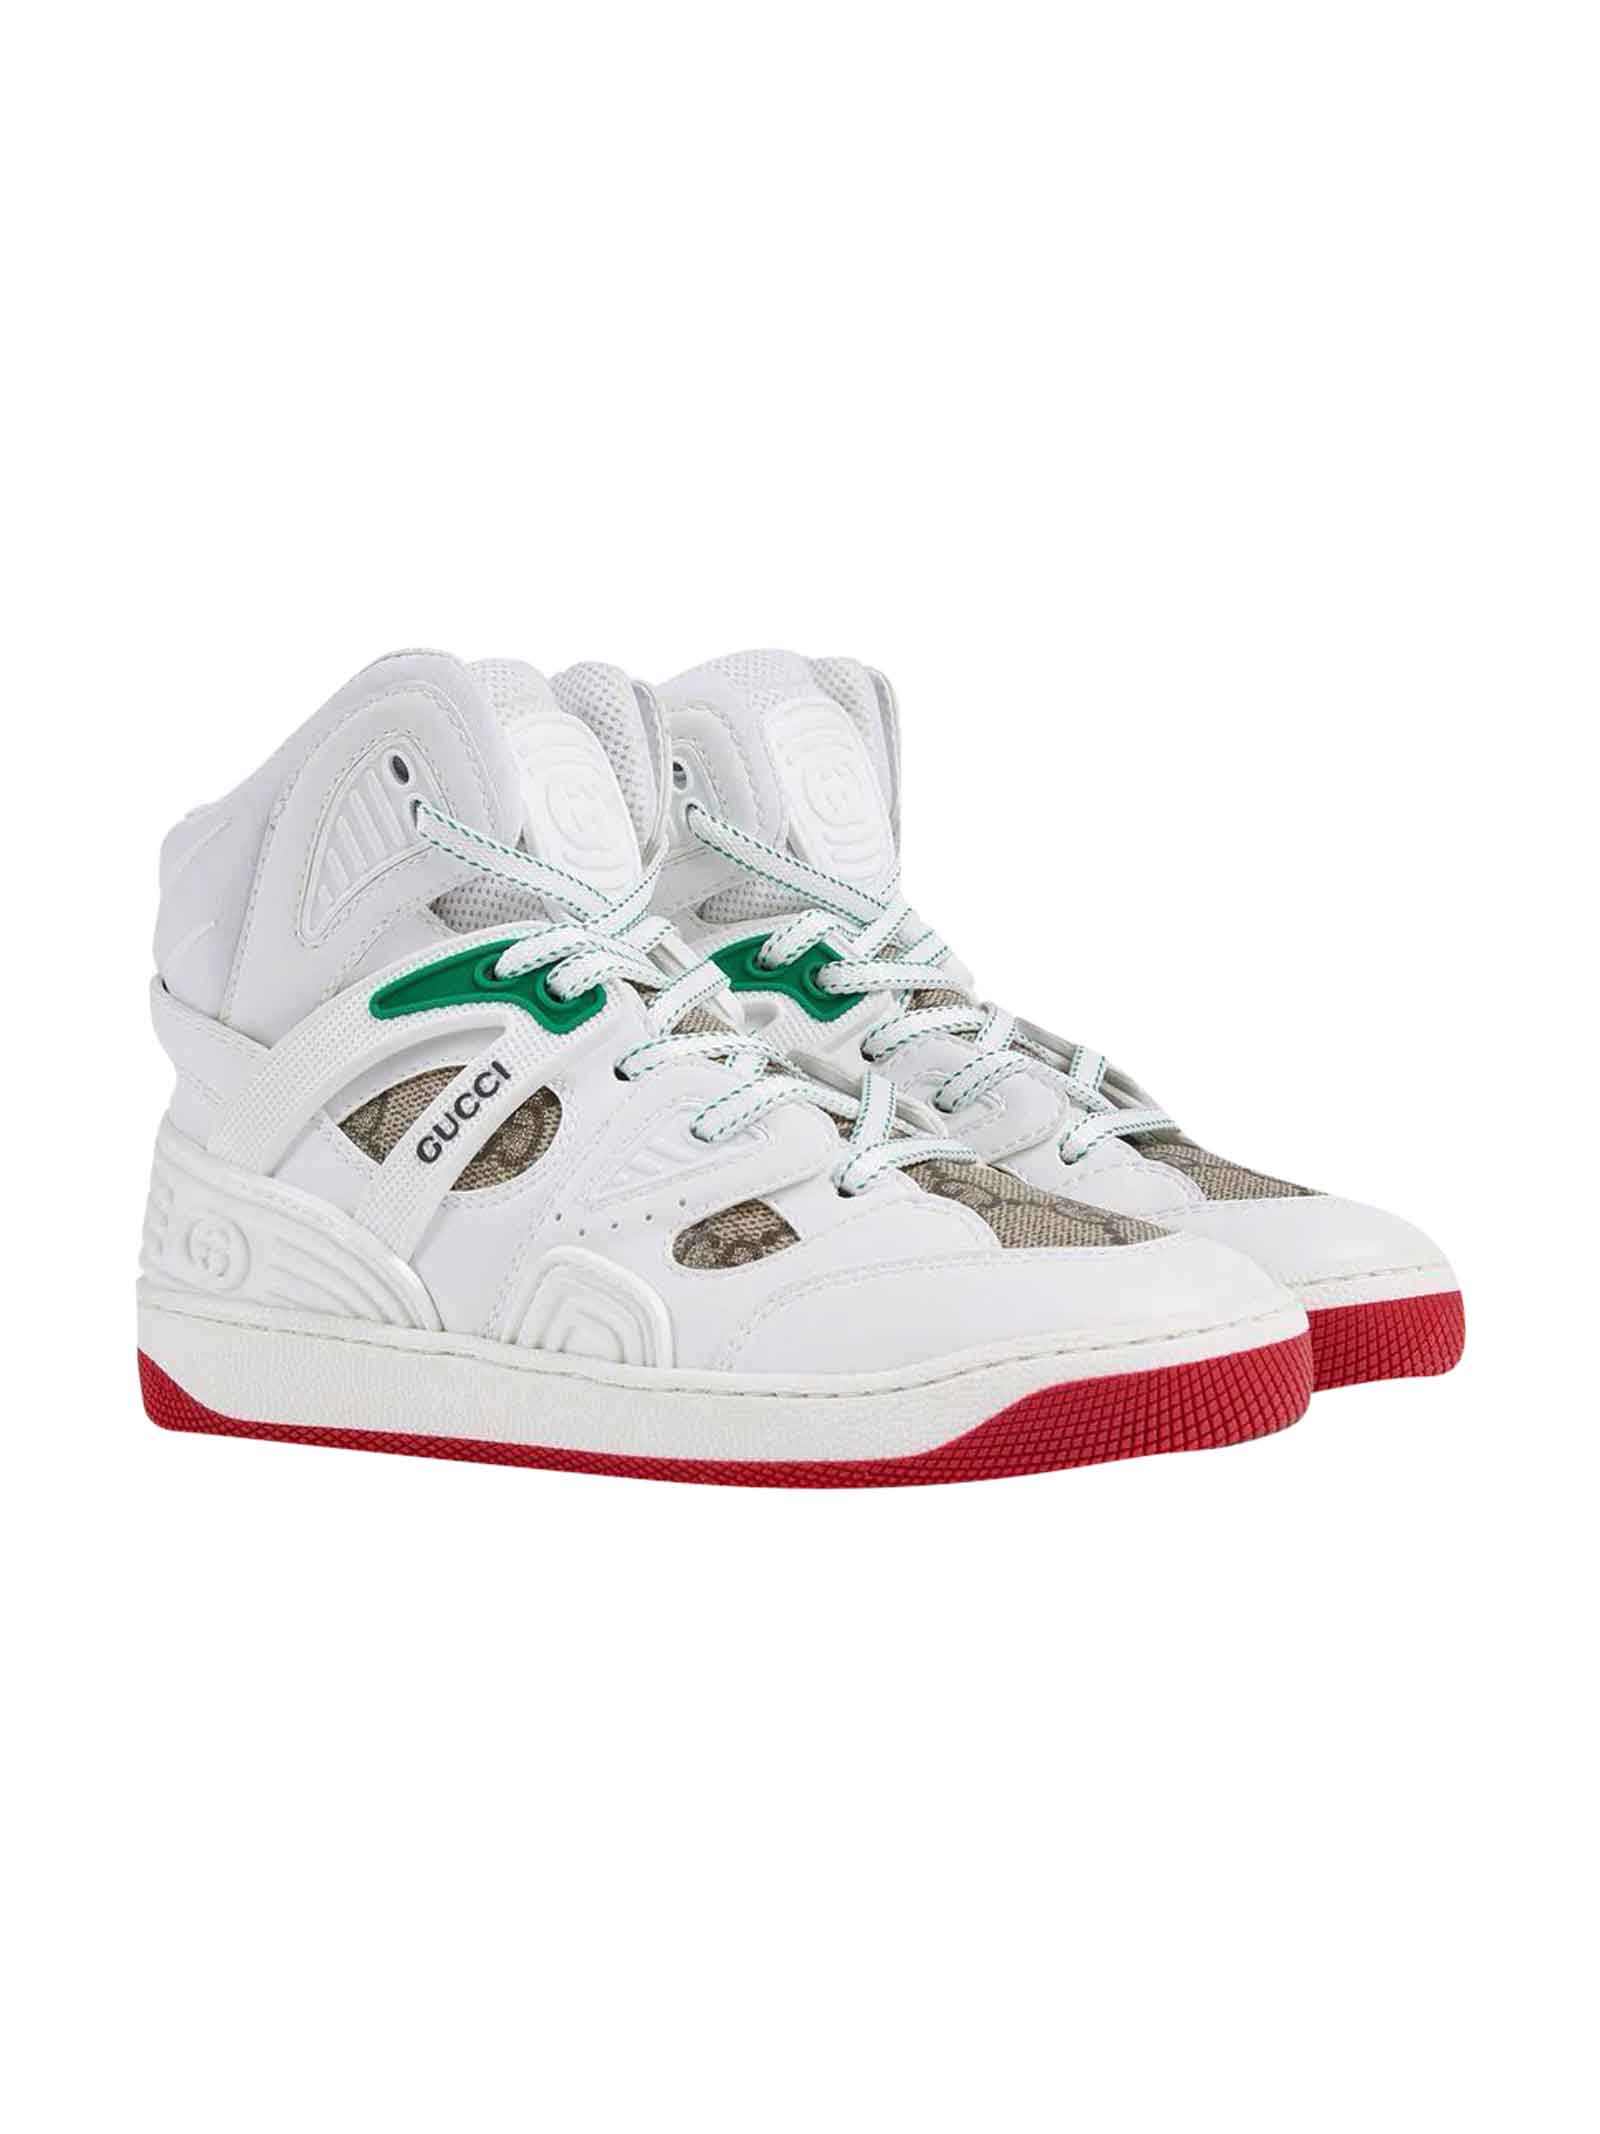 Gucci White Sneakers Unisex